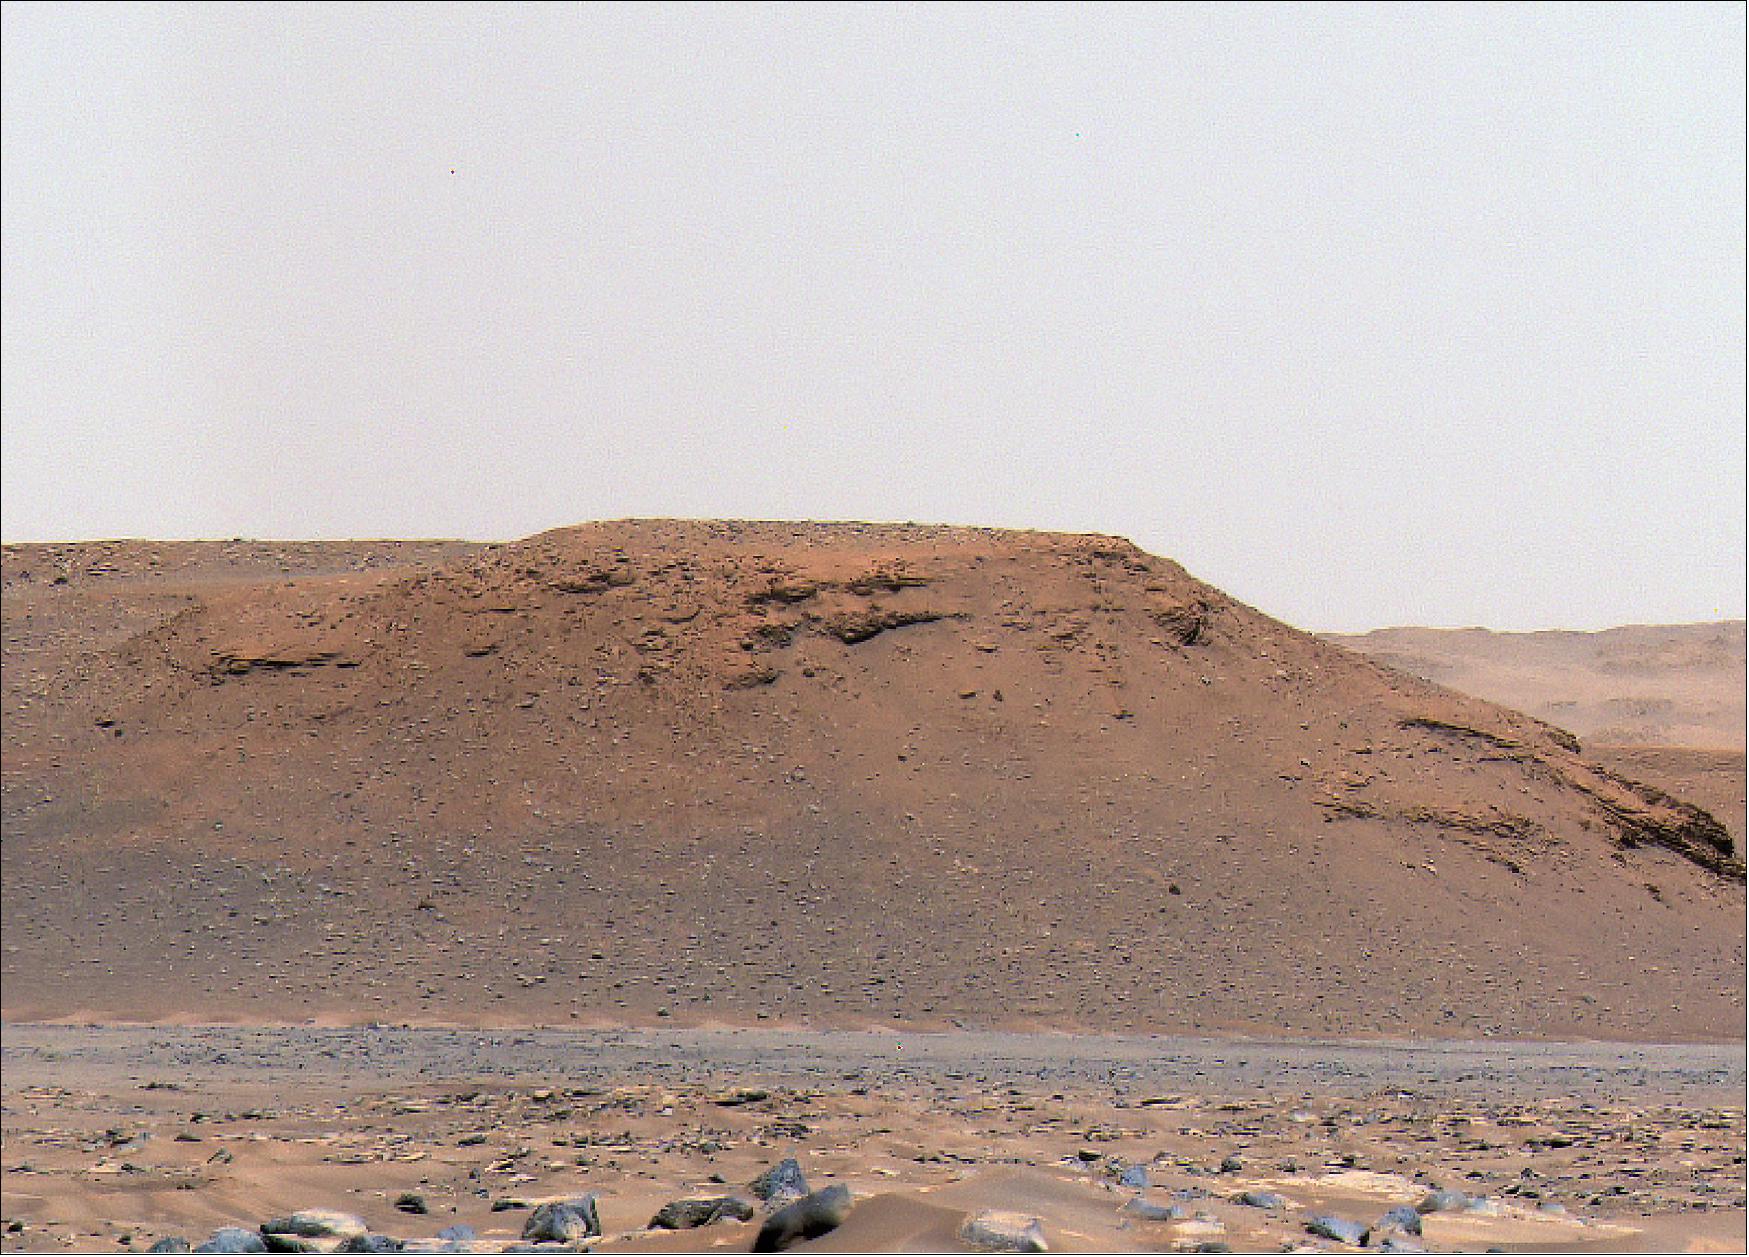 Figure 10: The escarpment the science team refers to as "Scarp a" is seen in this image captured by Perseverance rover's Mastcam-Z instrument on Apr. 17, 2021 (image credit: NASA/JPL-Caltech/ASU/MSSS)